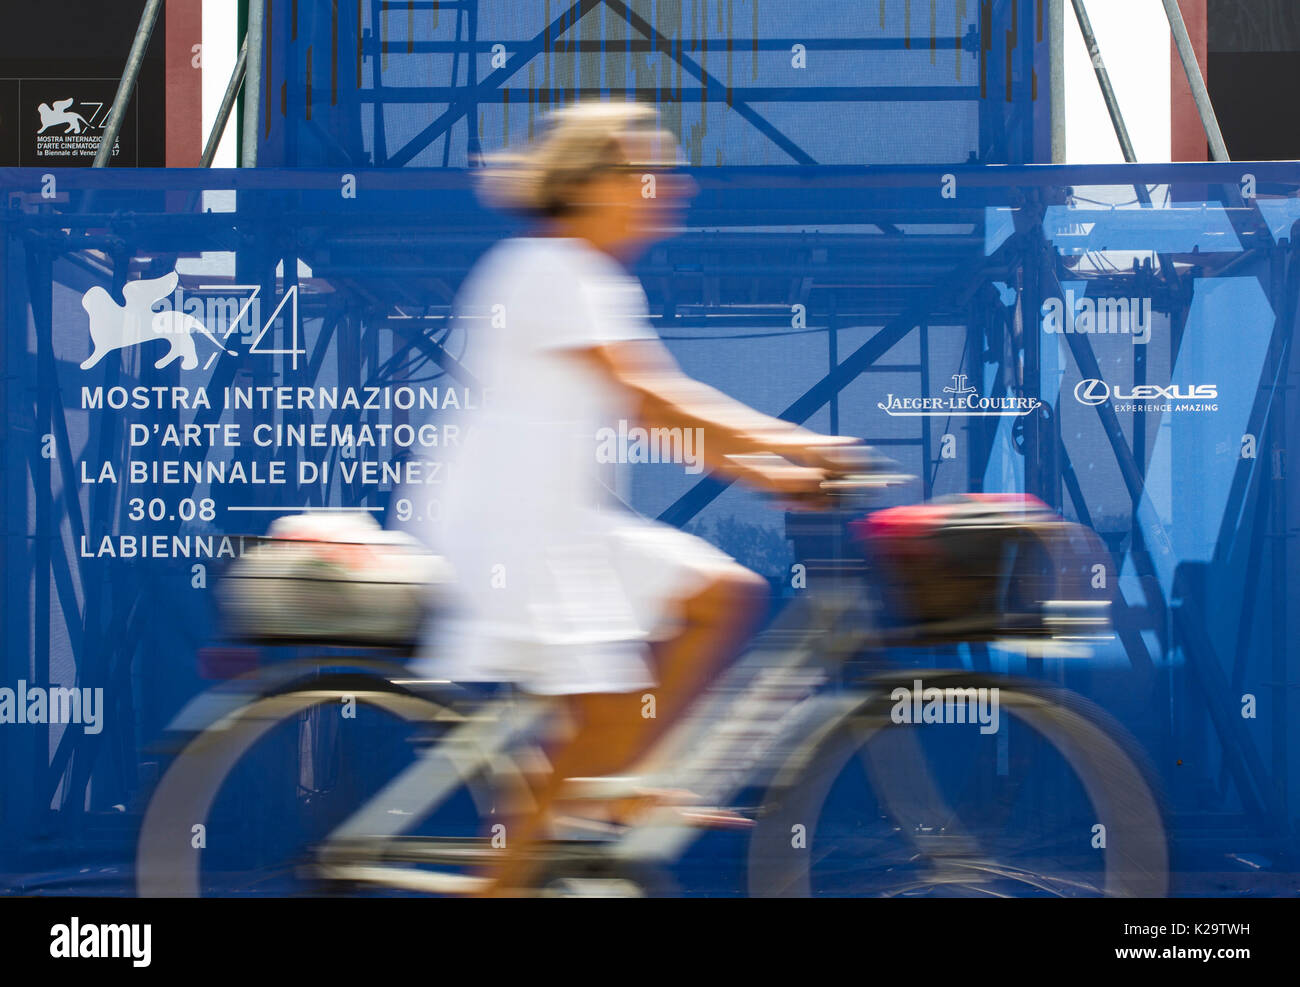 Venice, Italy. 29th Aug, 2017. A woman rides past the advertisement of the 74th Venice International Film Festival, in Venice, Italy, on Aug. 29, 2017. The 74th Venice Film Festival will kick off in Lido of Venice on Aug. 30 and run until Sept. 9. Credit: Jin Yu/Xinhua/Alamy Live News Stock Photo